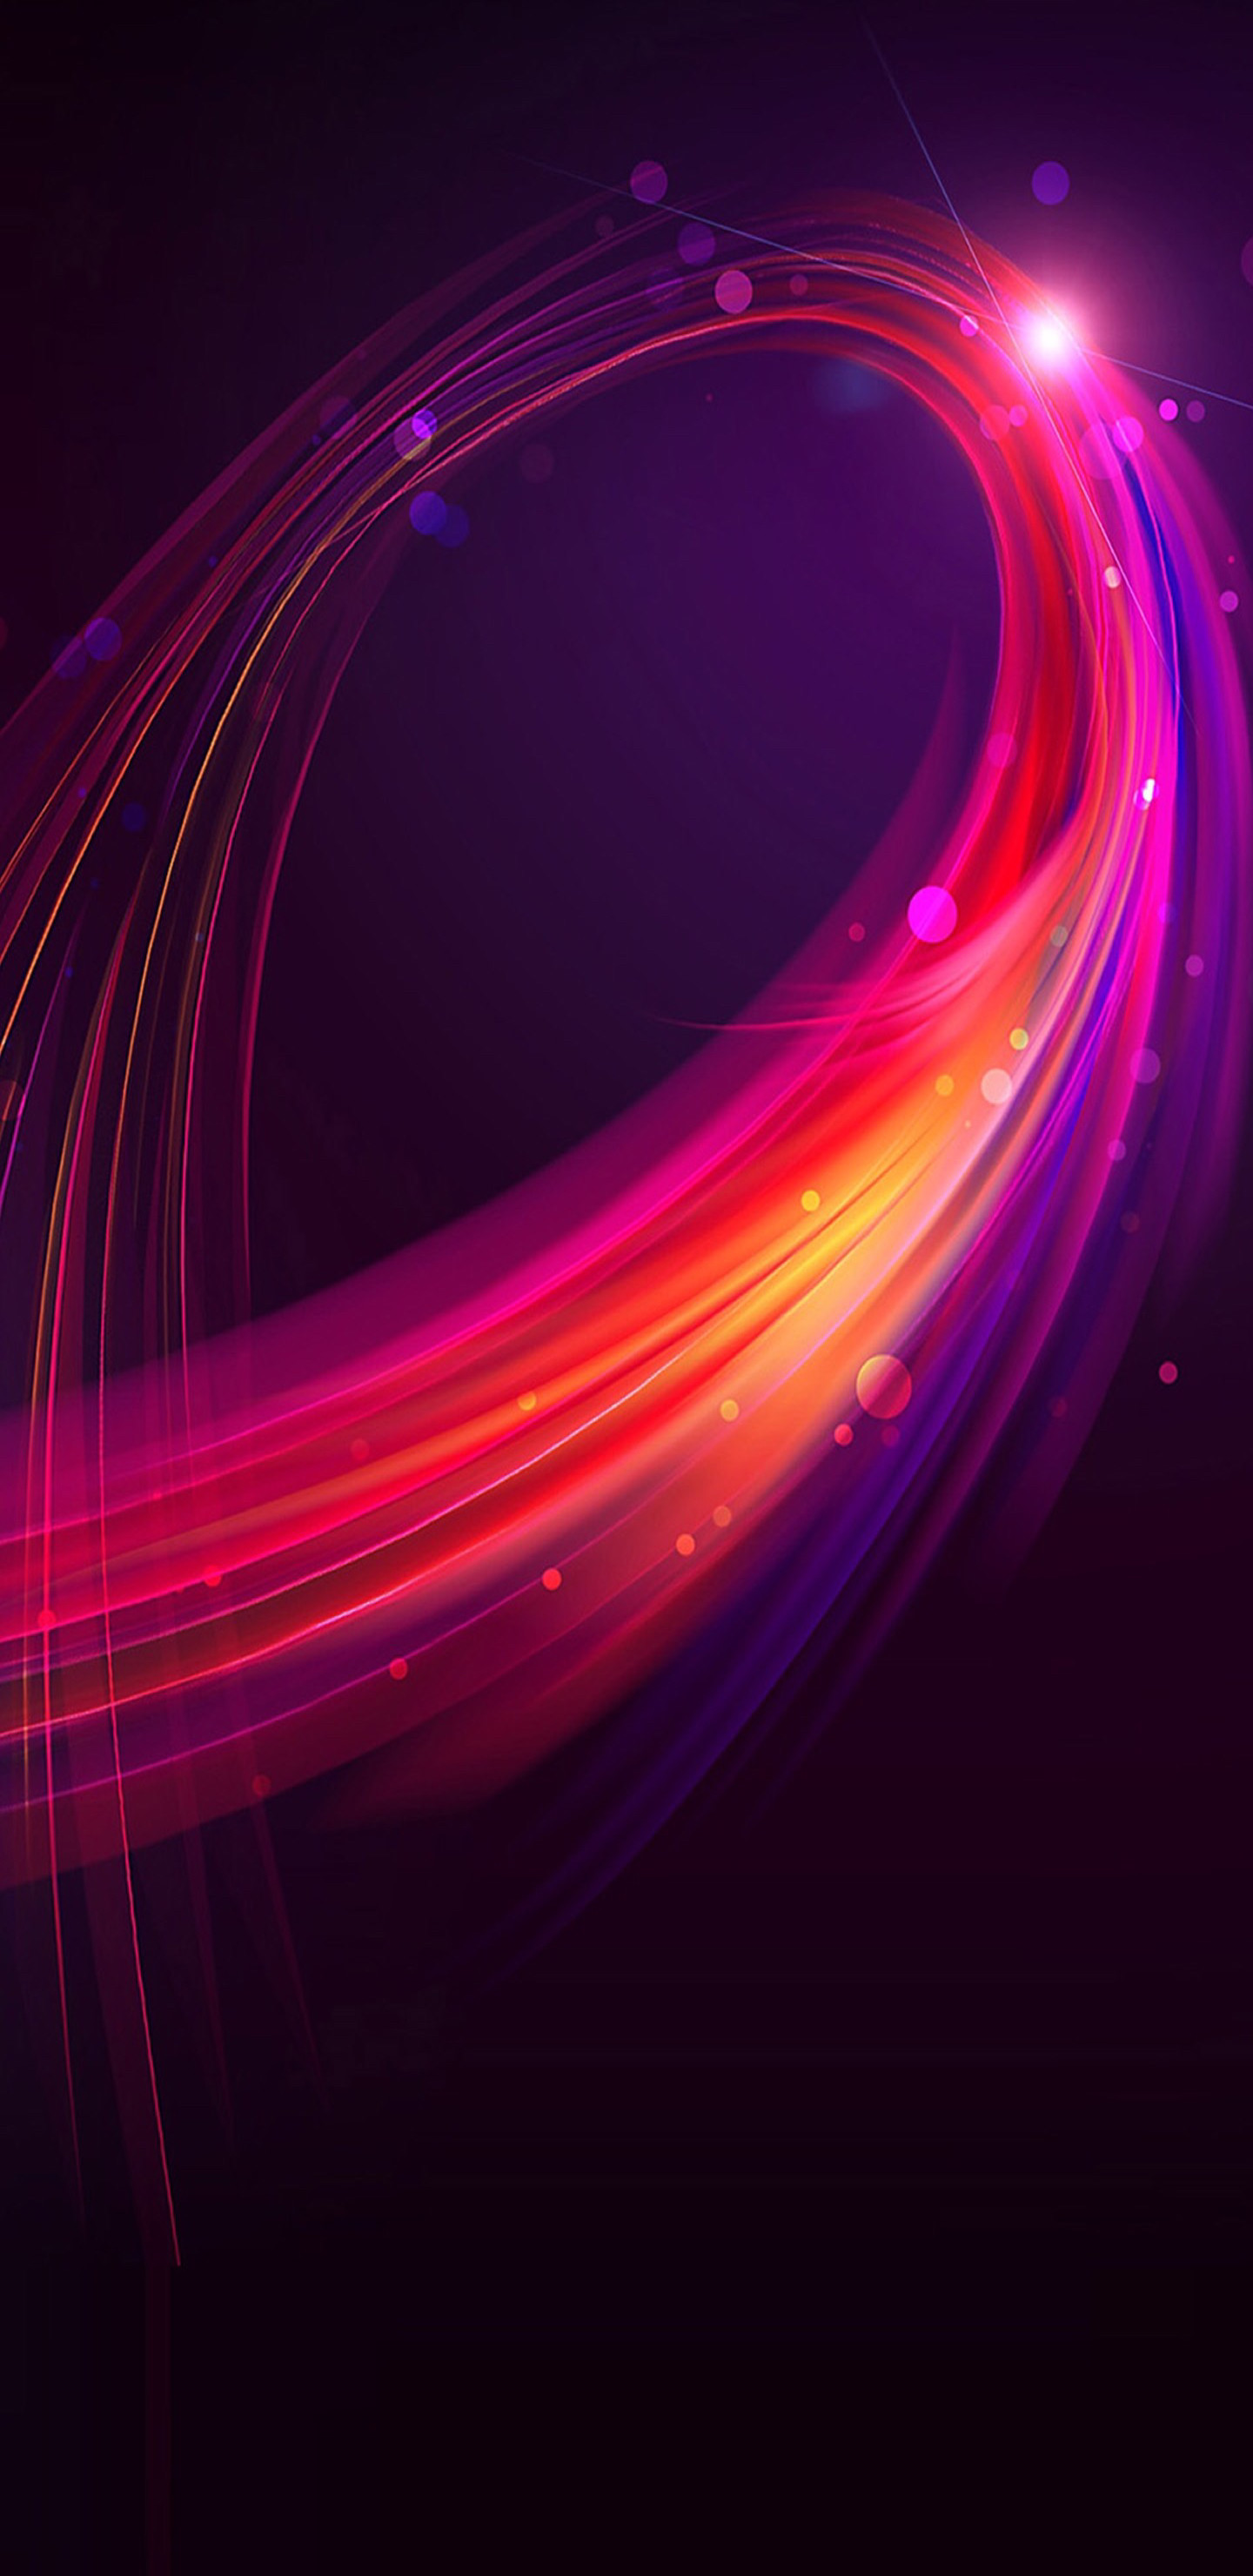 1440x2960 Blue, red, purple, minimal, abstract, wallpaper, galaxy, clean,